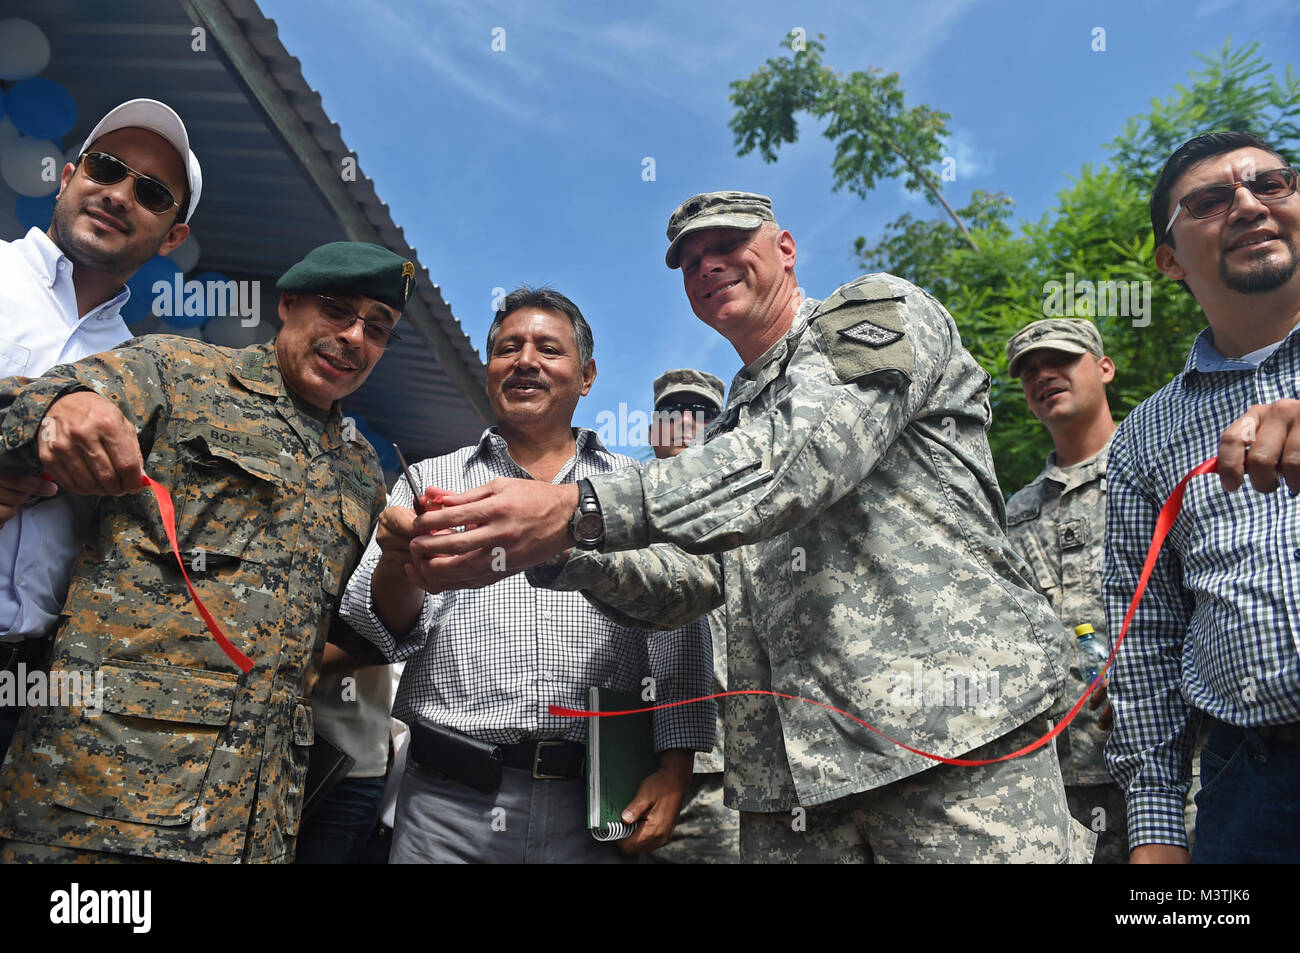 CATARINA, Guatemala – U.S. Army, Guatemalan army and Municipality of Catarina officials cut a ribbon at an opening ceremony for a new school June 10, 2016, during Exercise BEYOND THE HORIZON 2016 GUATEMALA. U.S. military members assigned to Joint Task Force Red Wolf completed construction on the school building June 9, 2016 six days ahead of schedule. (U.S. Air Force photo by Senior Airman Dillon Davis/Released) 160610-F-RC891-124 by ussouthcom Stock Photo